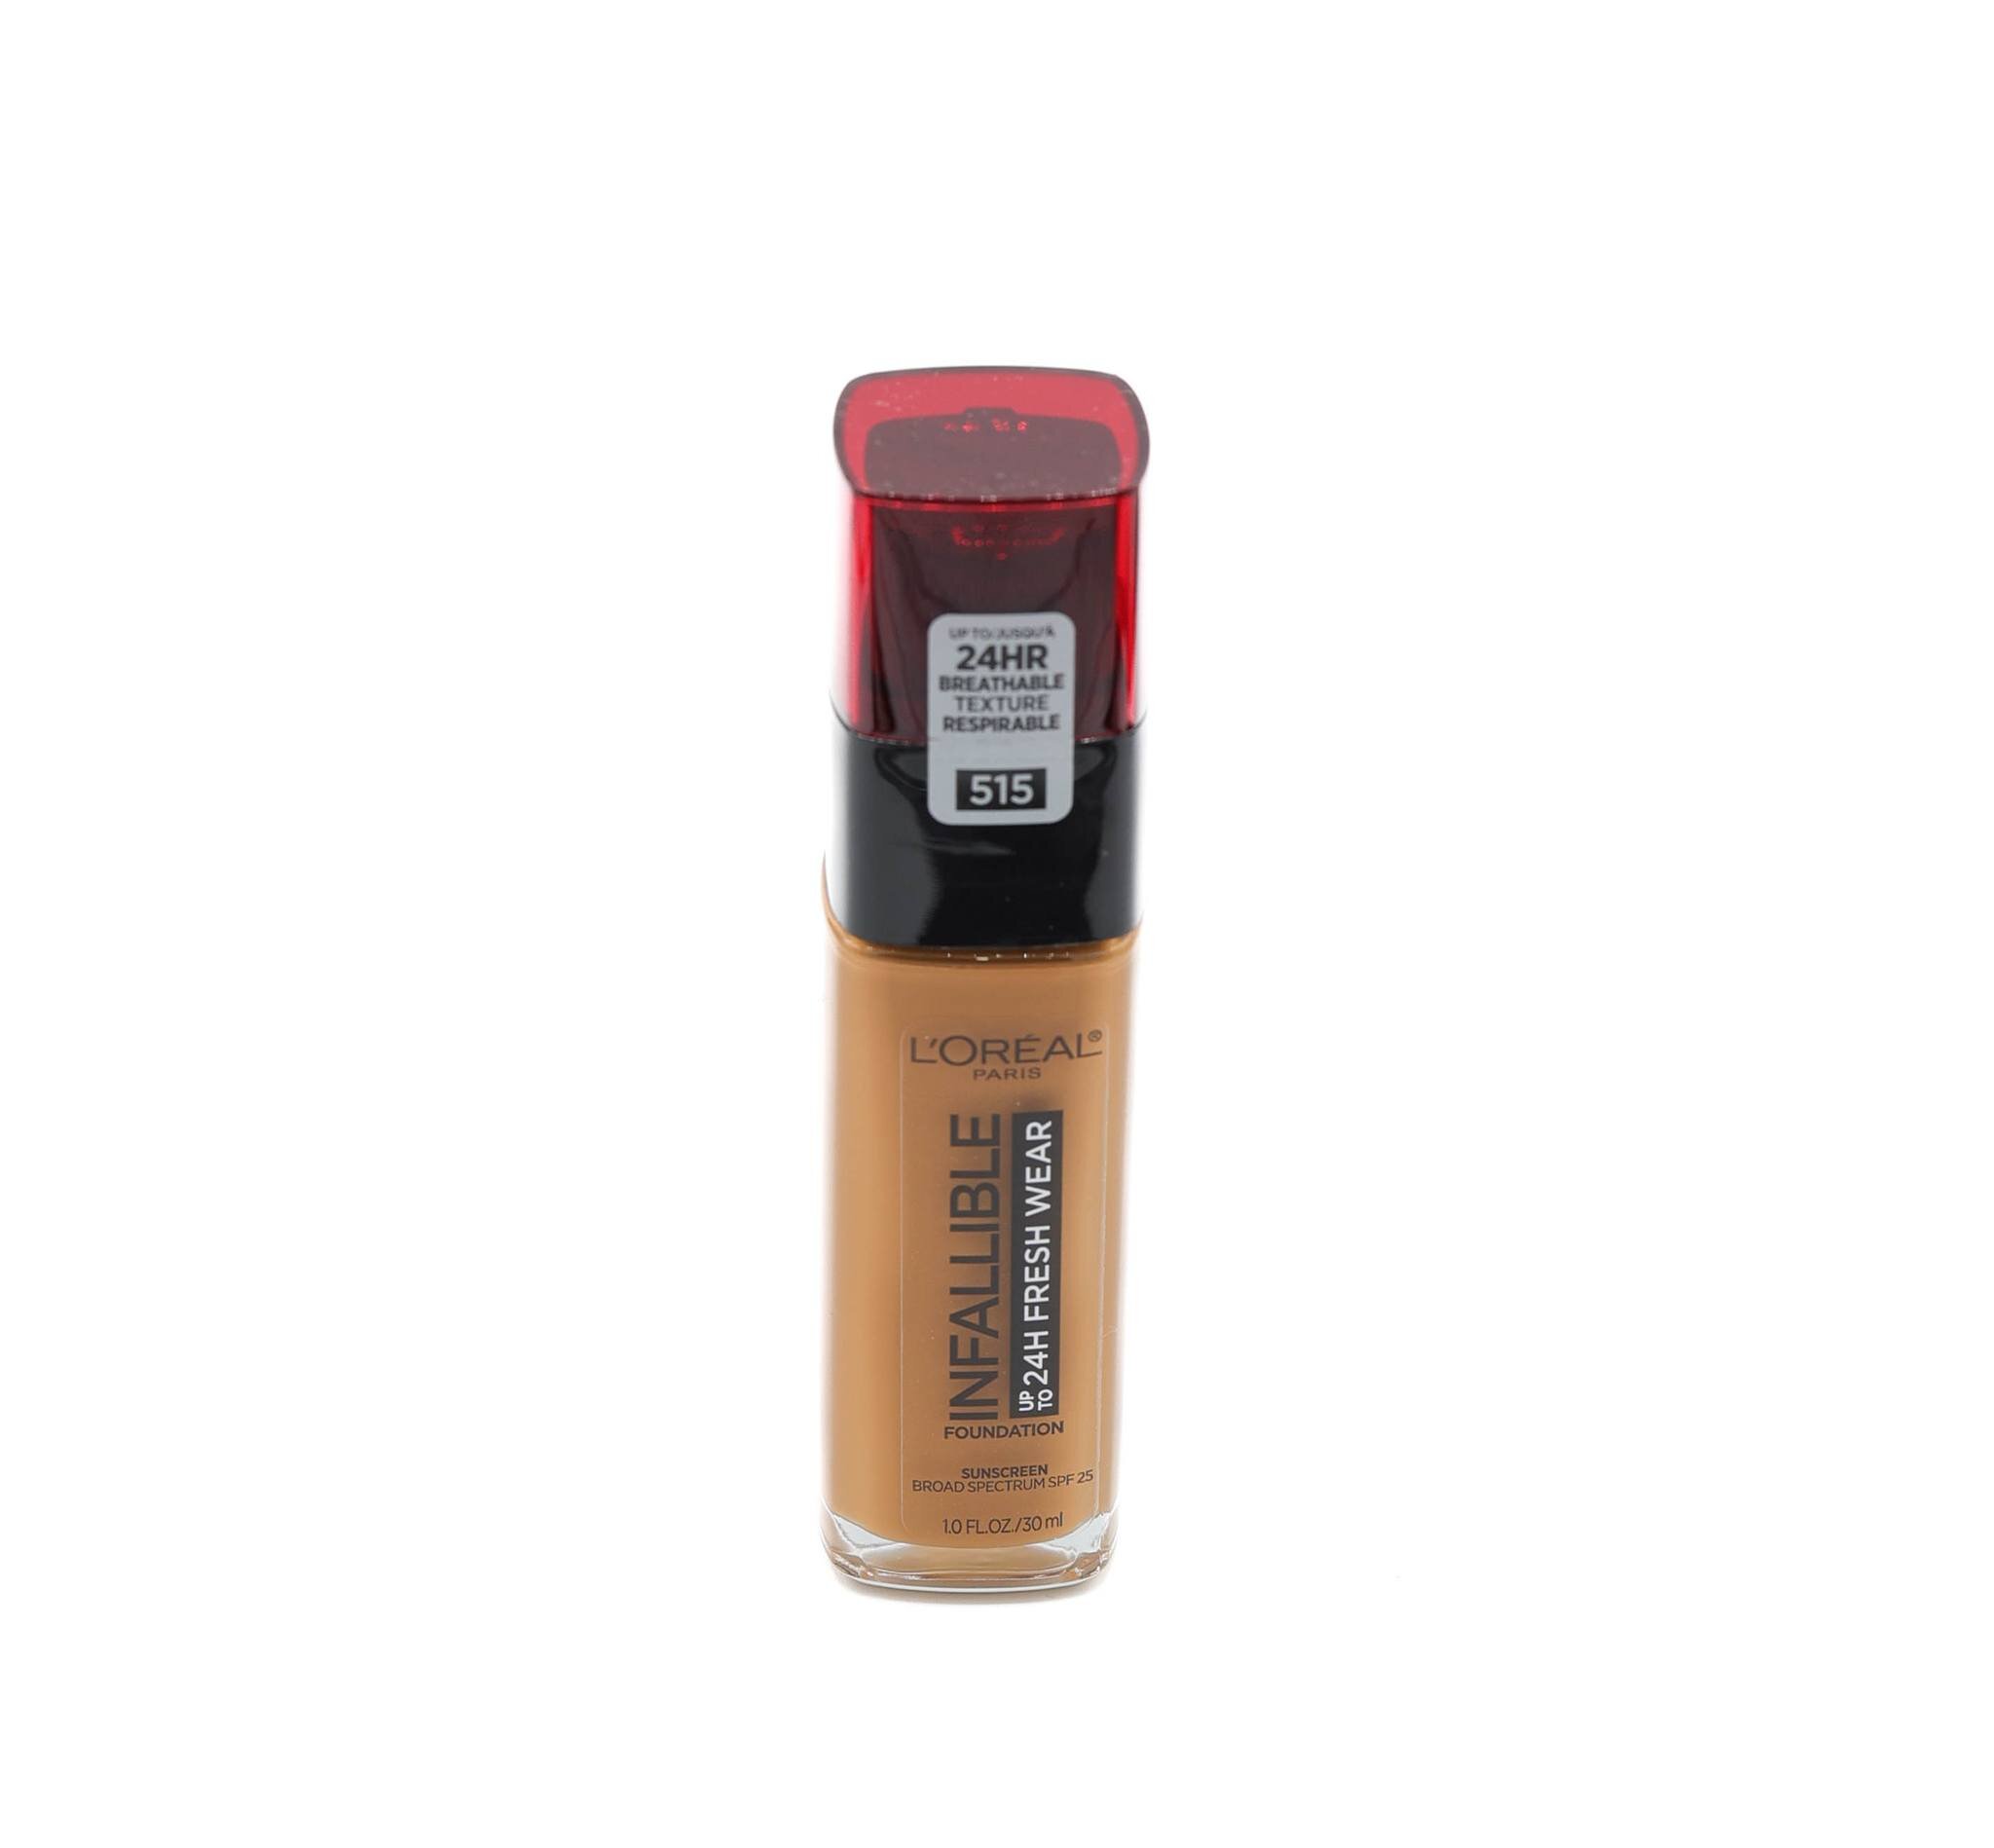 L'oreal Infallible 24HR Fresh Wear Foundation.
&mdash;
For wholesale orders, please get in touch with us via WhatsApp: (+1) 646 707 1346.
&mdash;
Up to 24HR Fresh Wear Foundation provides medium-to-full buildable coverage that lasts all day and allow